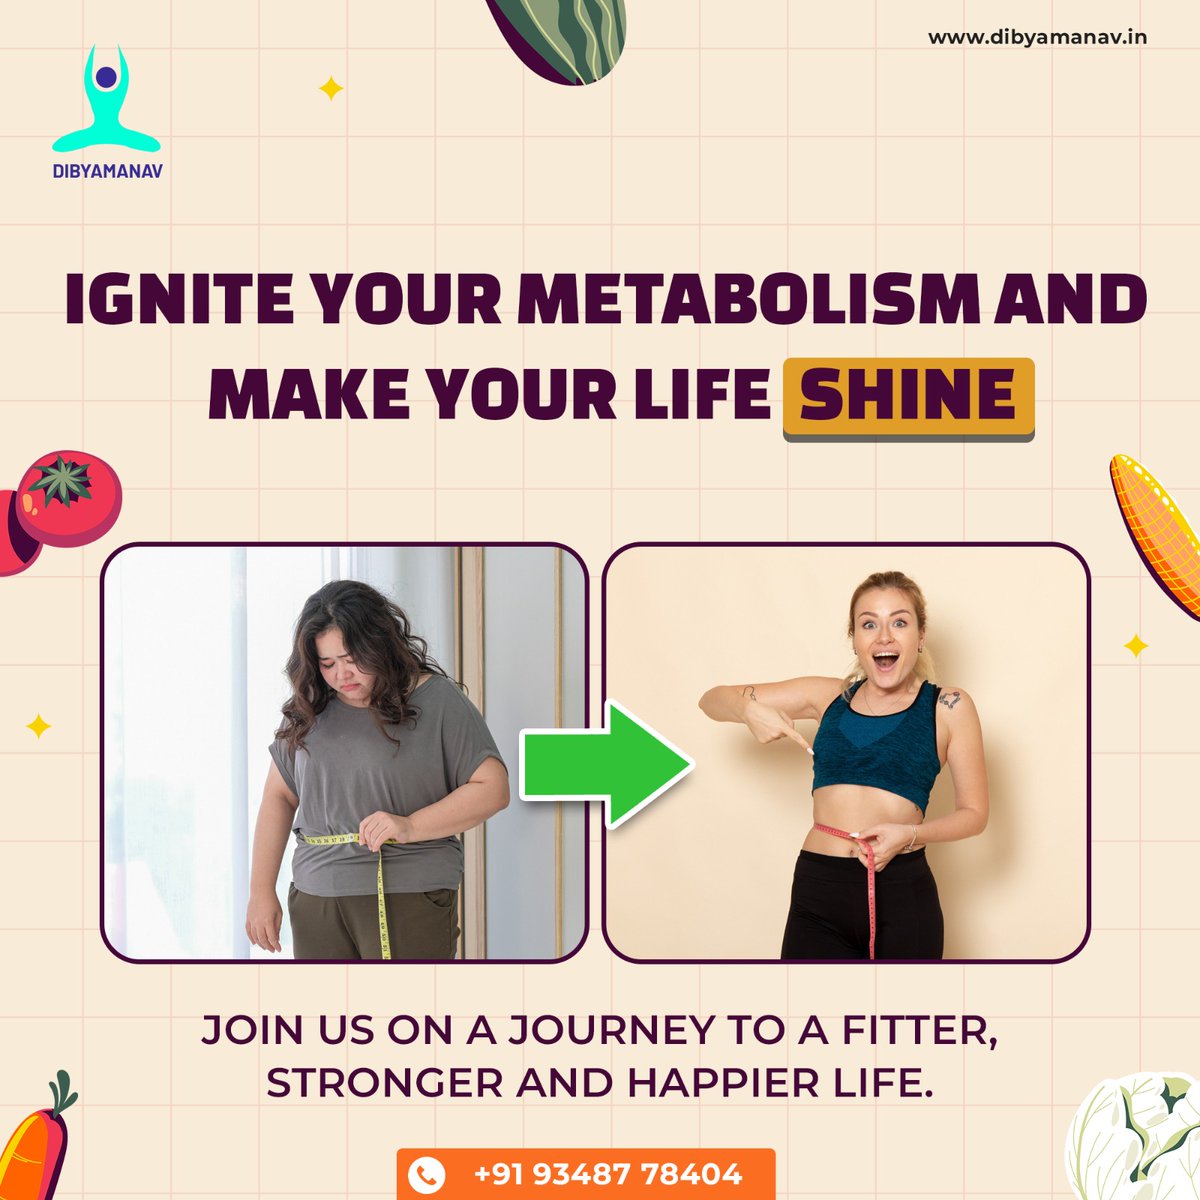 Embark on a Journey to a Healthier and Fitter Life! 📷
Now kick-start your weight loss journey and embrace a fit and fabulous lifestyle with us.

Visit us at dibyamanav.in to learn more.

#WeightLossRevolution #FitLifeJourney #HealthierTogether #dibyamanav